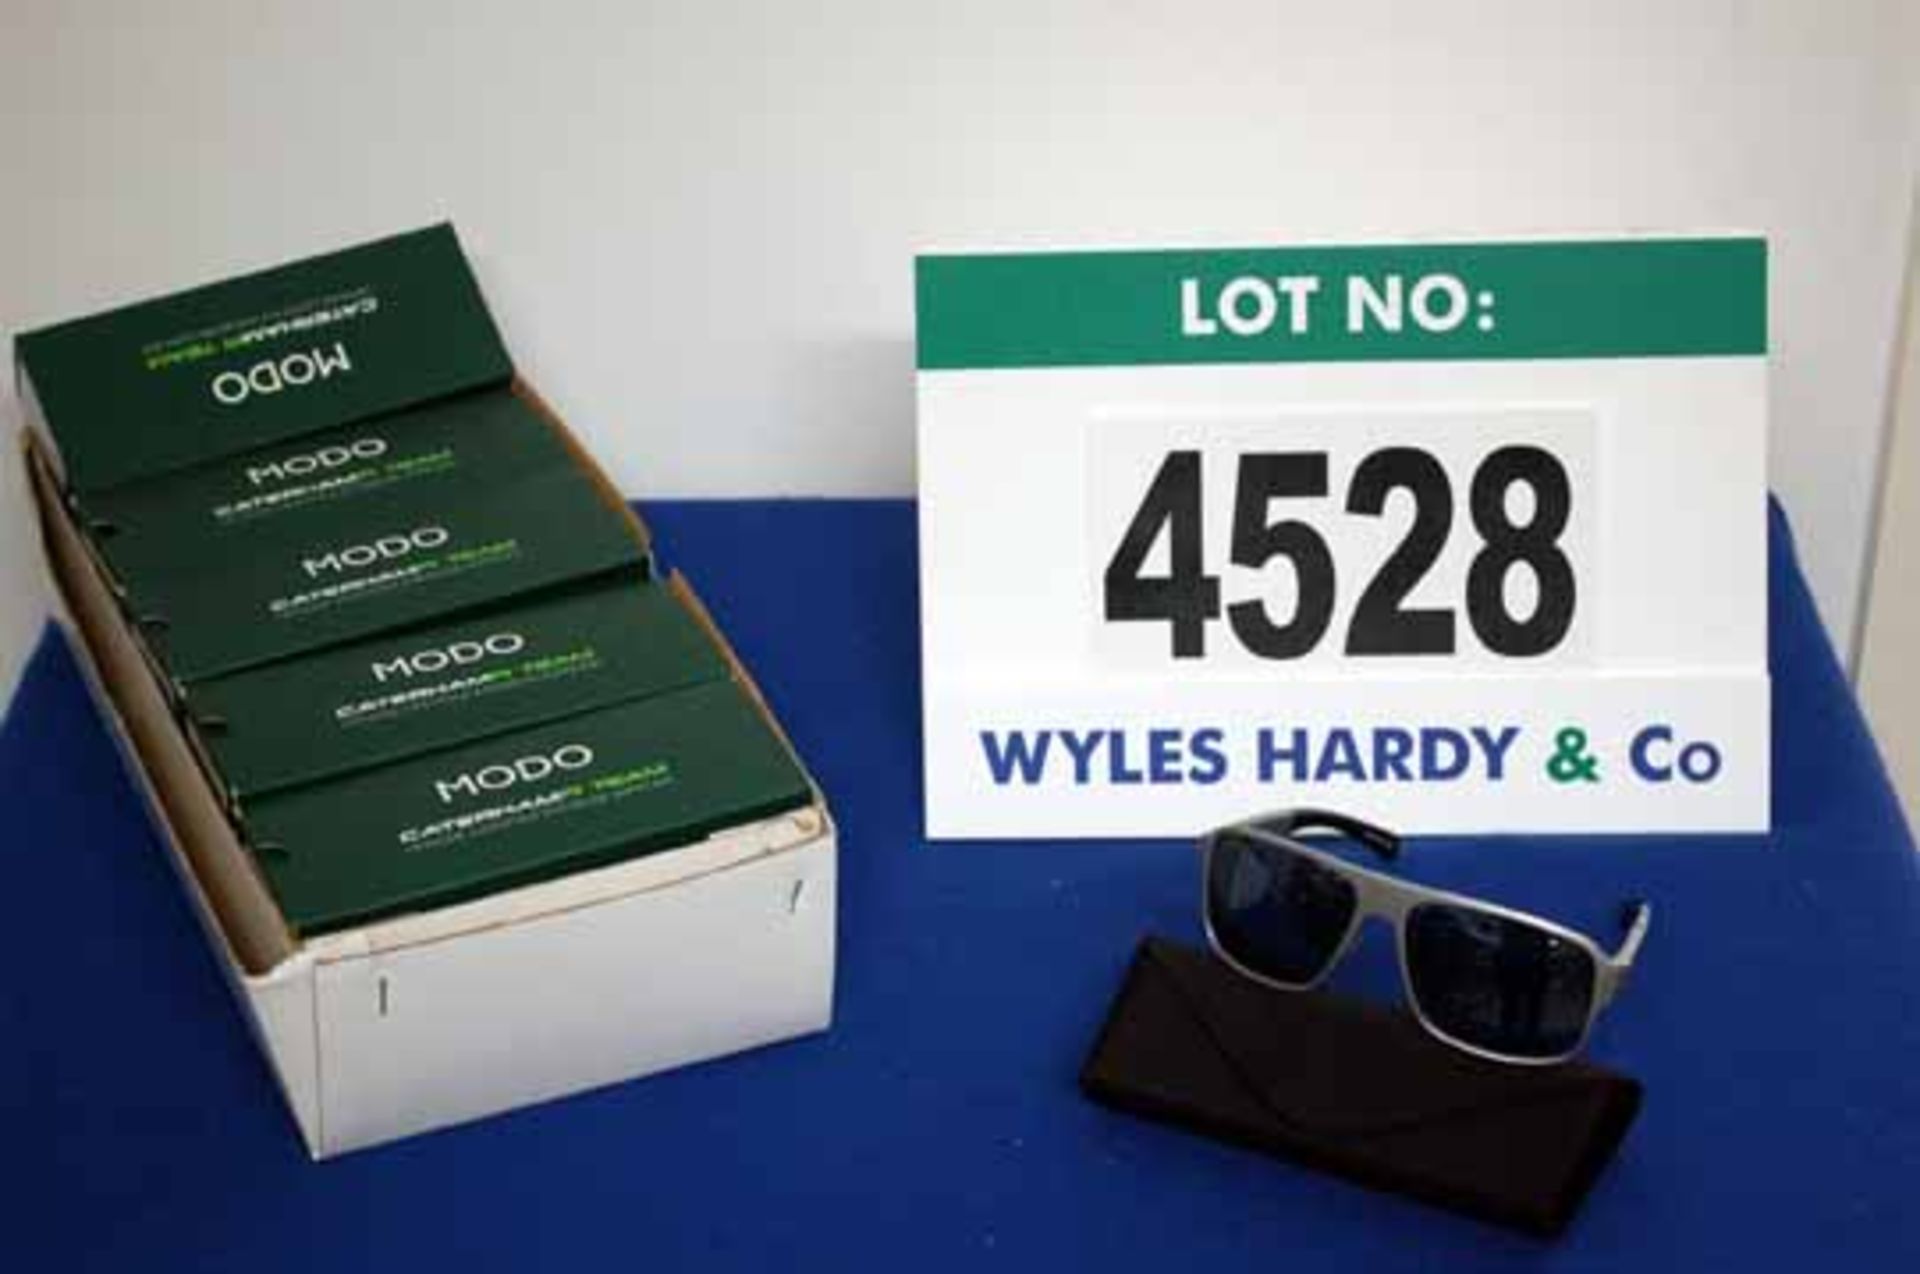 Ten Pairs CATERHAM F1 Team Sunglasses (Want it Shipped? http://bit.ly/1wIhCEv)